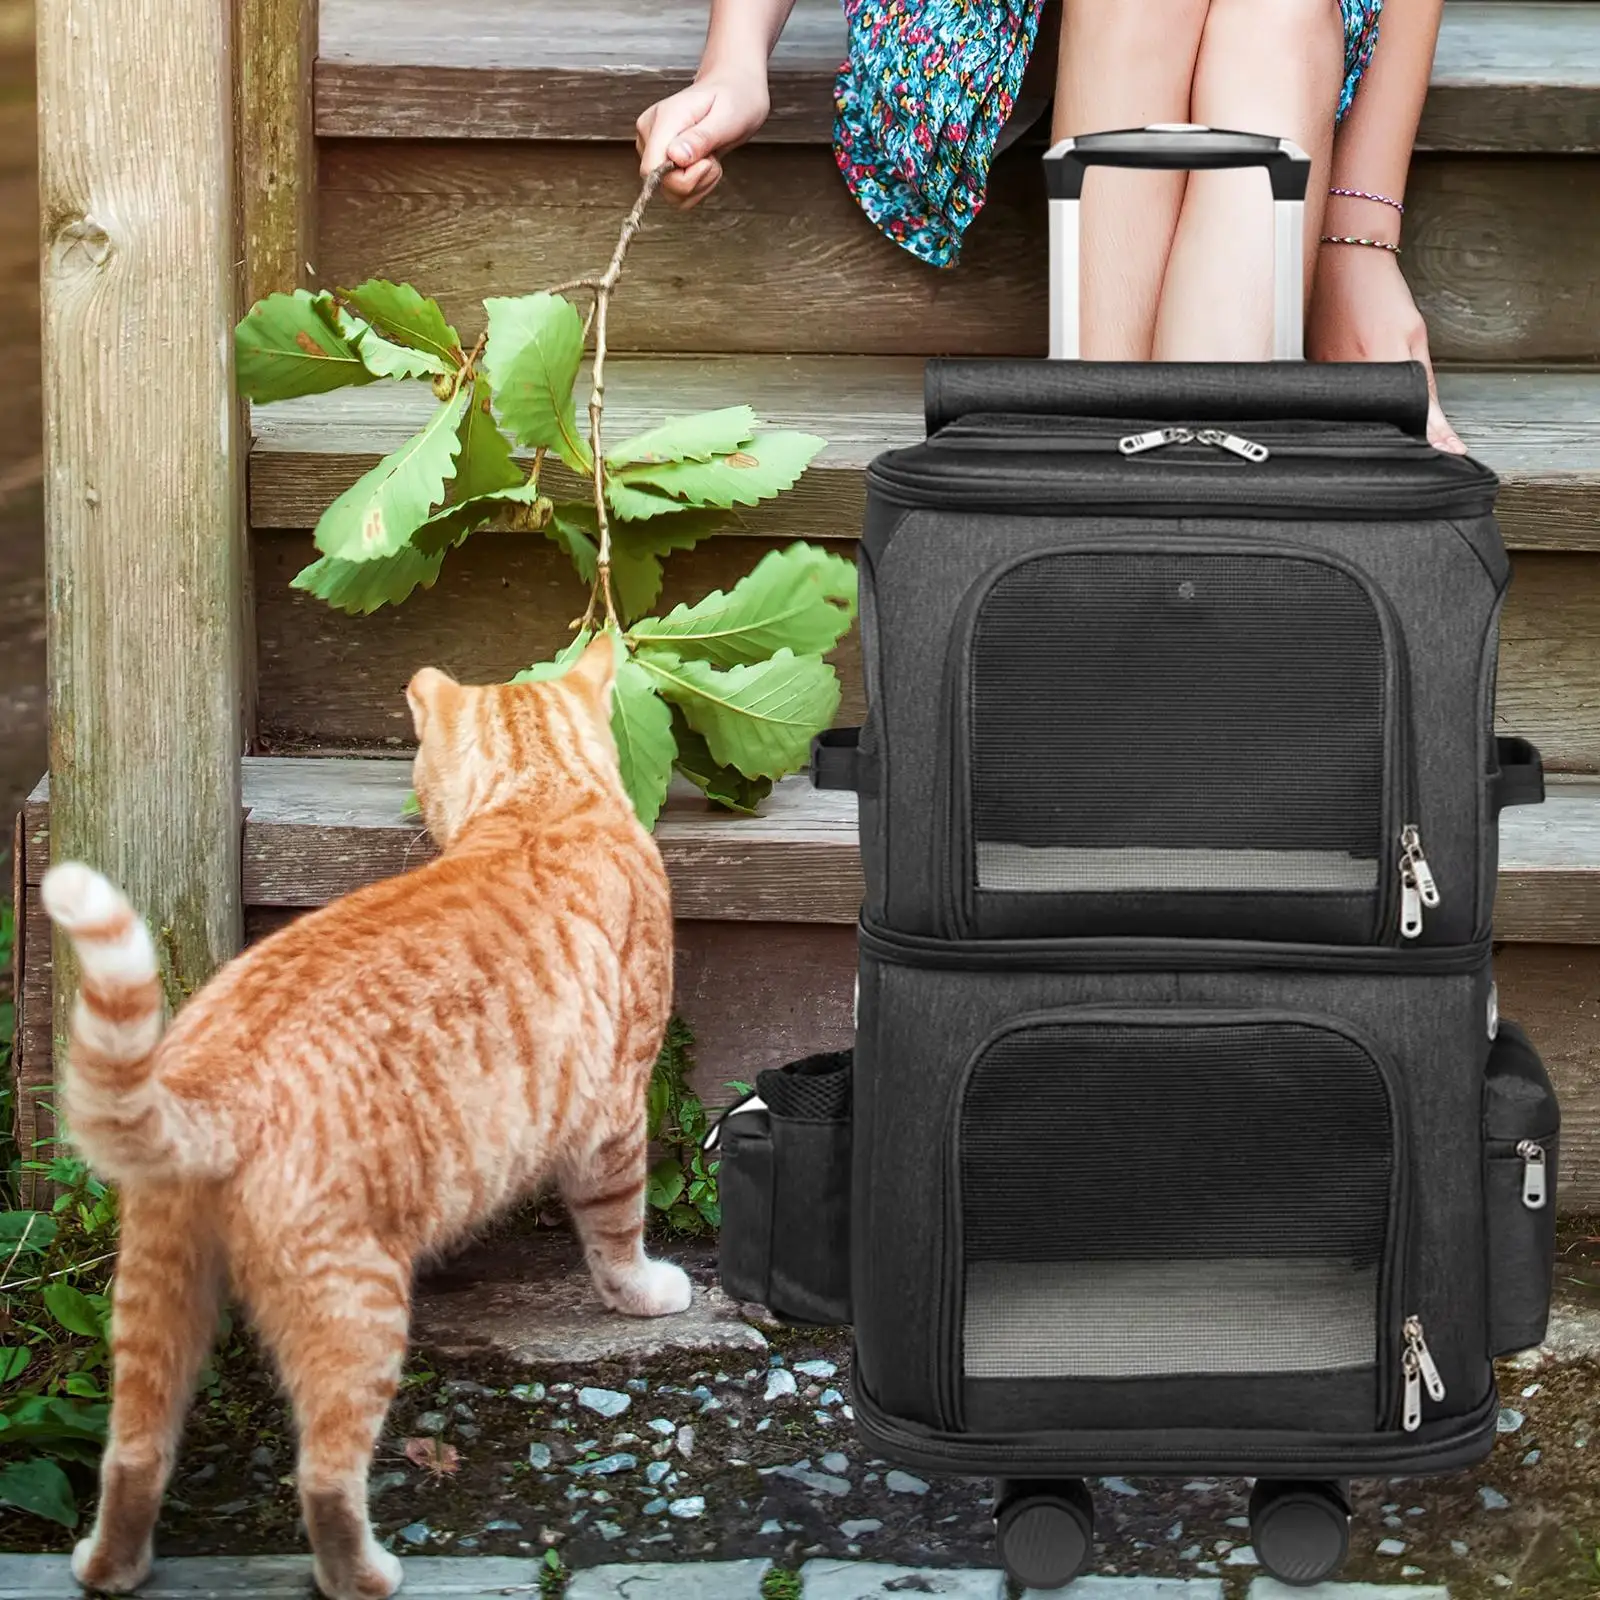 Cat Trolley Case Bag Pet Rolling Carrier Travel Tote with for